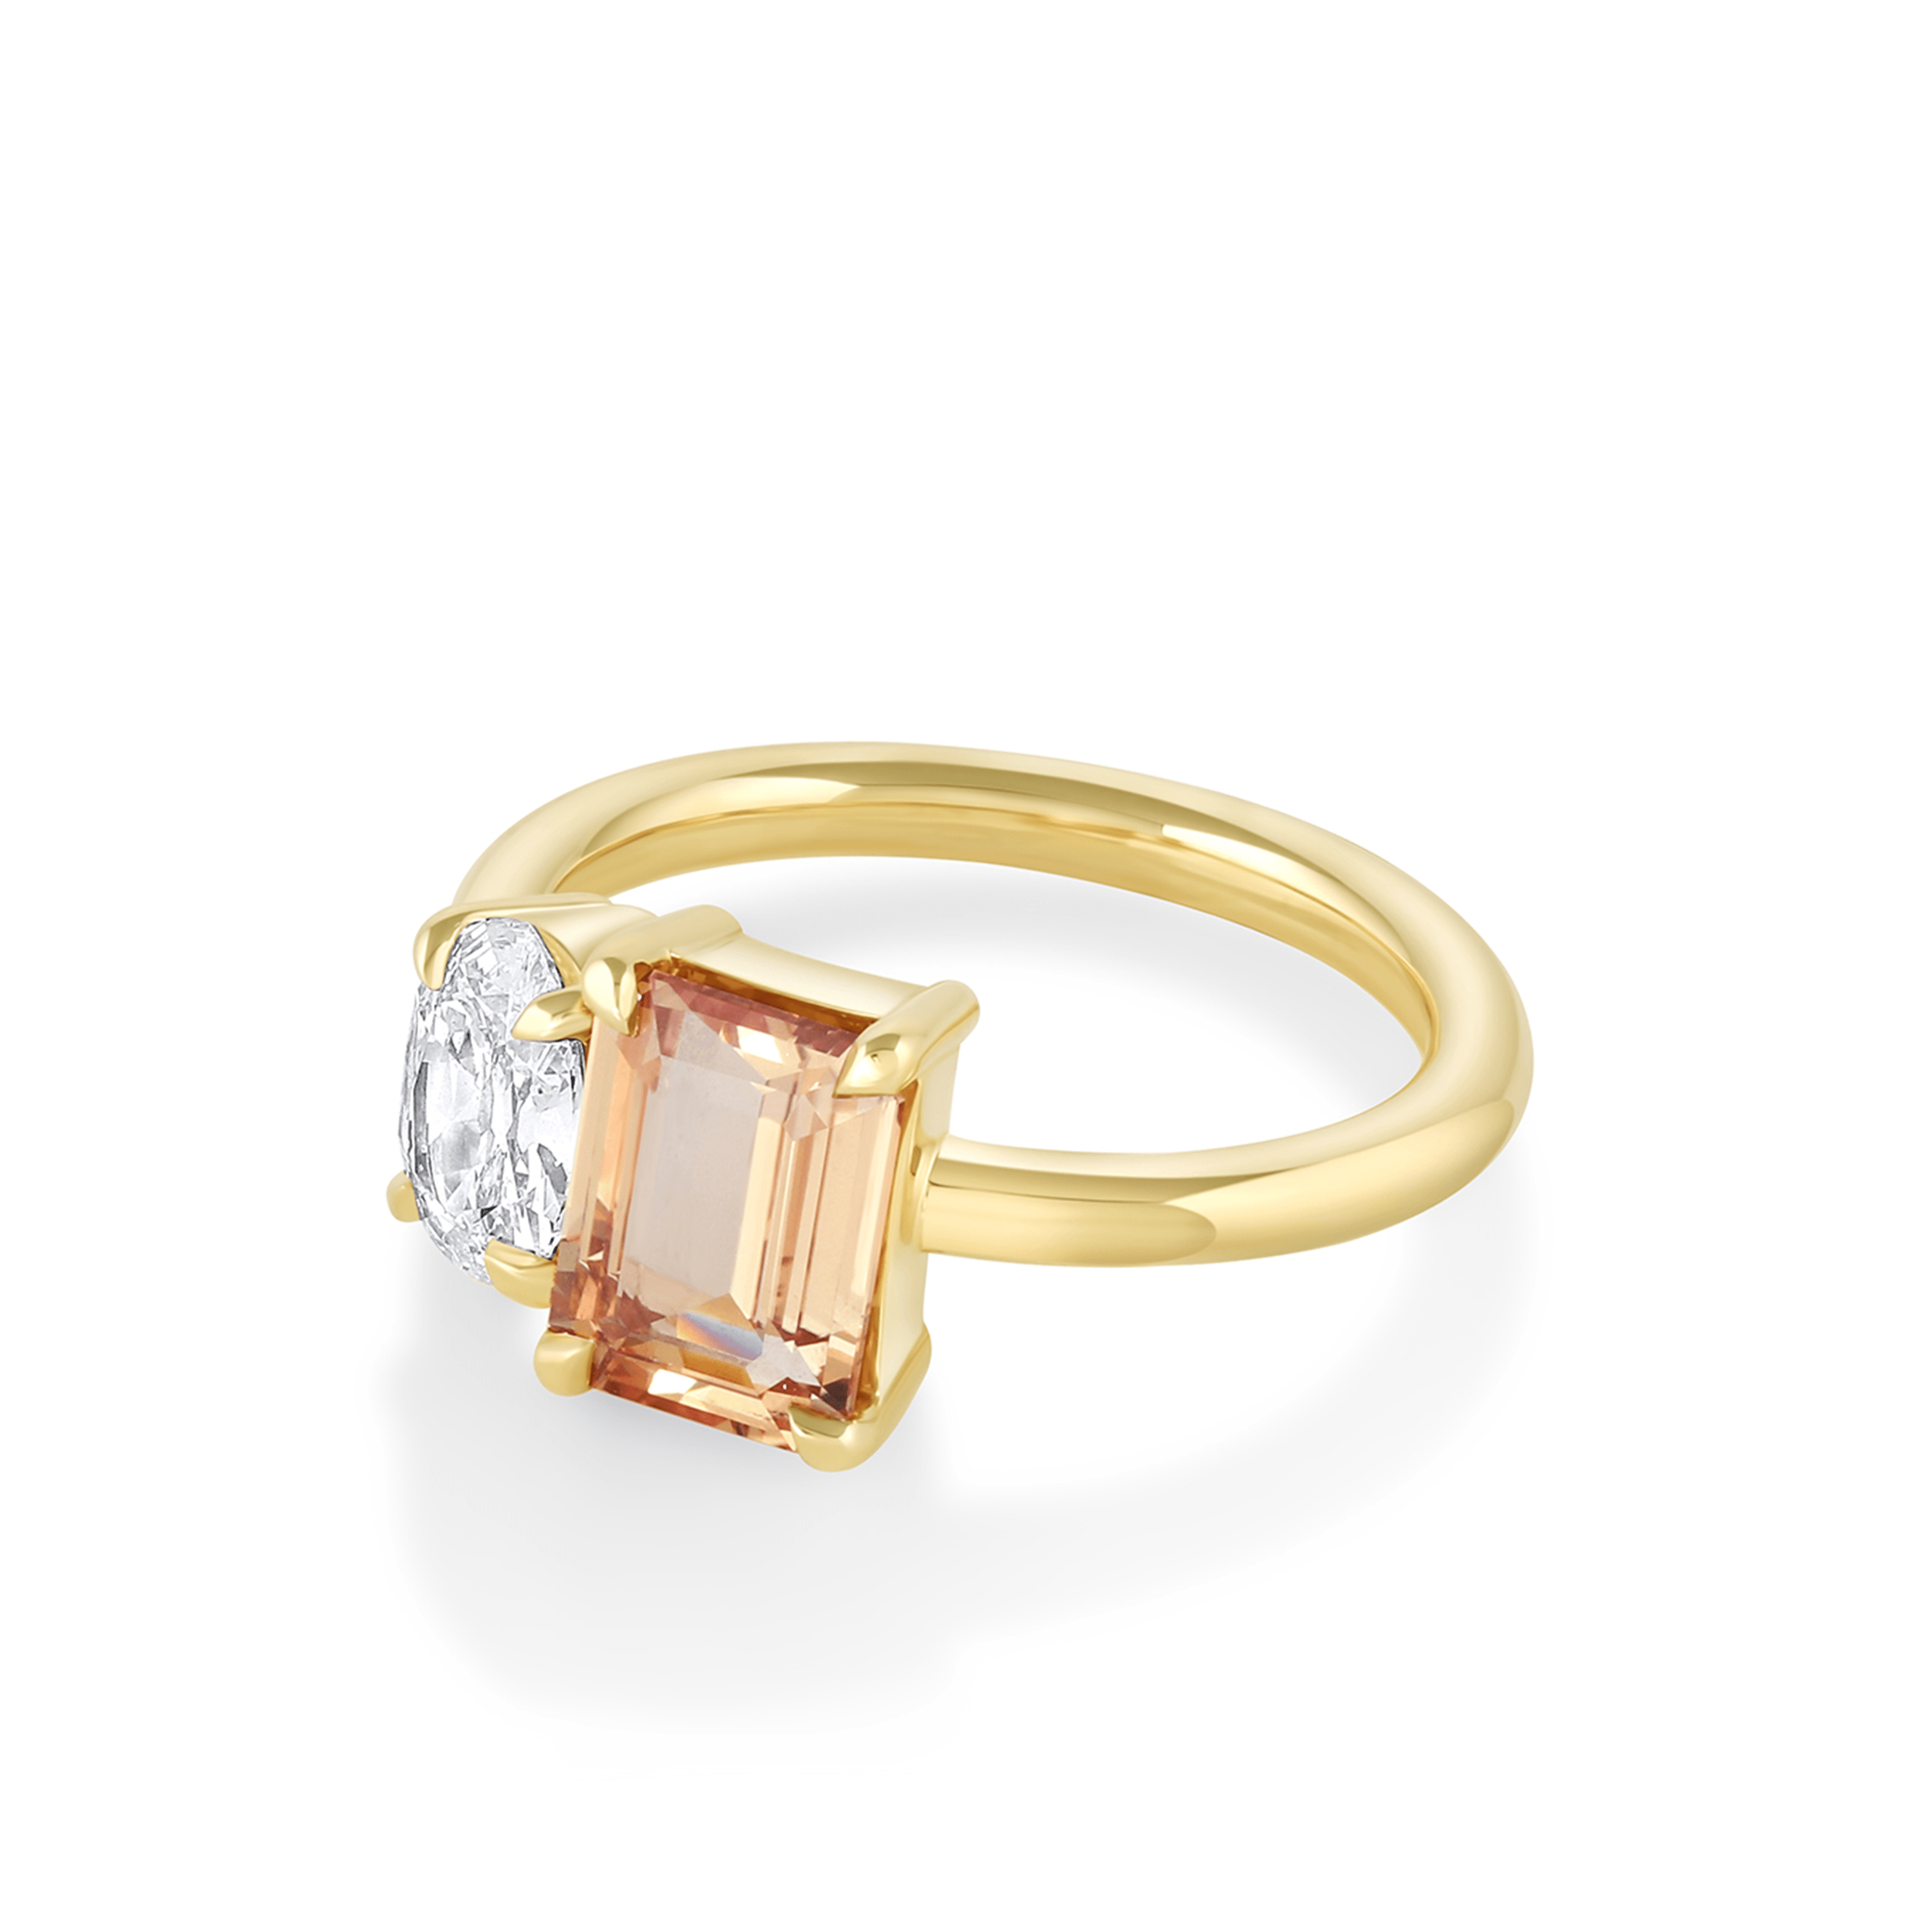 Features a 2.01ct natural peach sapphire emerald cut & .68ct F/SI1 hybrid oval